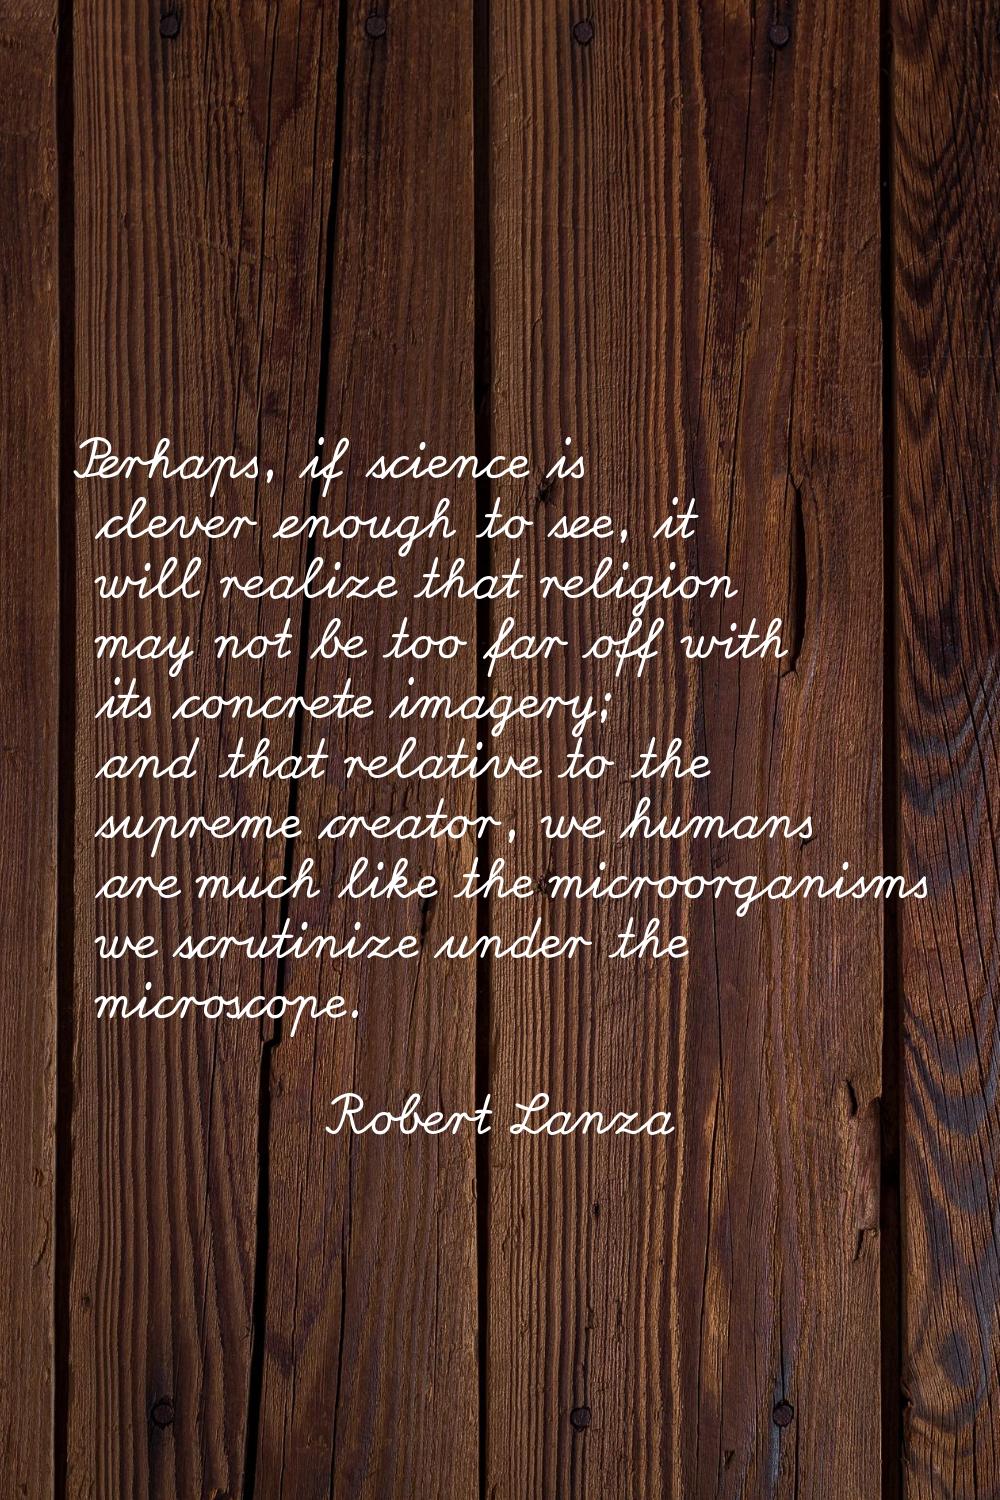 Perhaps, if science is clever enough to see, it will realize that religion may not be too far off w